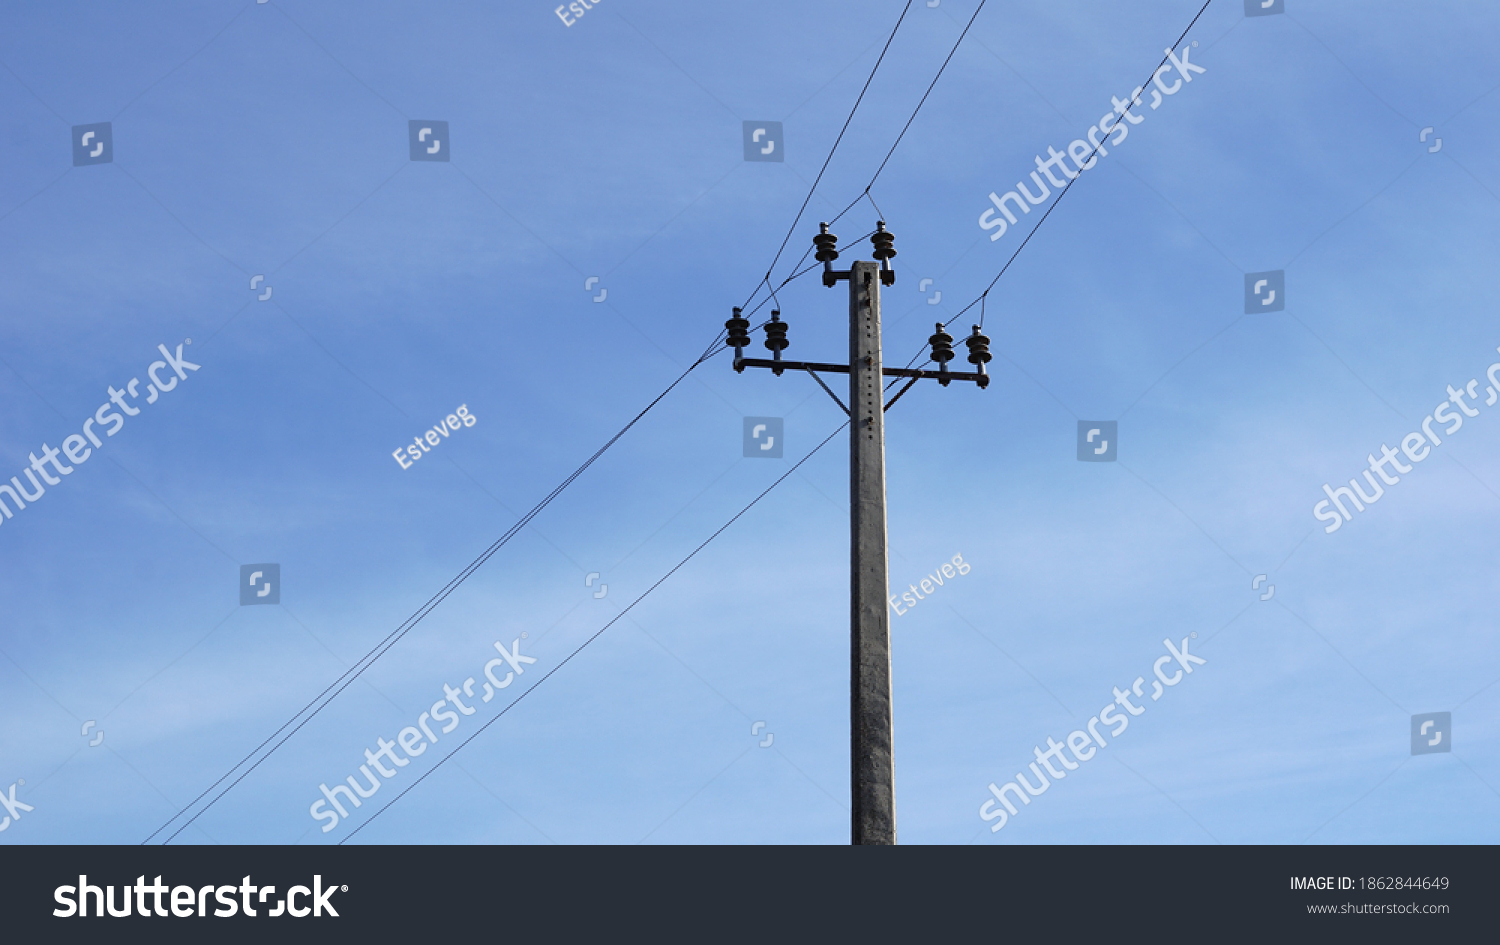 low voltage electricity post against blue background #1862844649